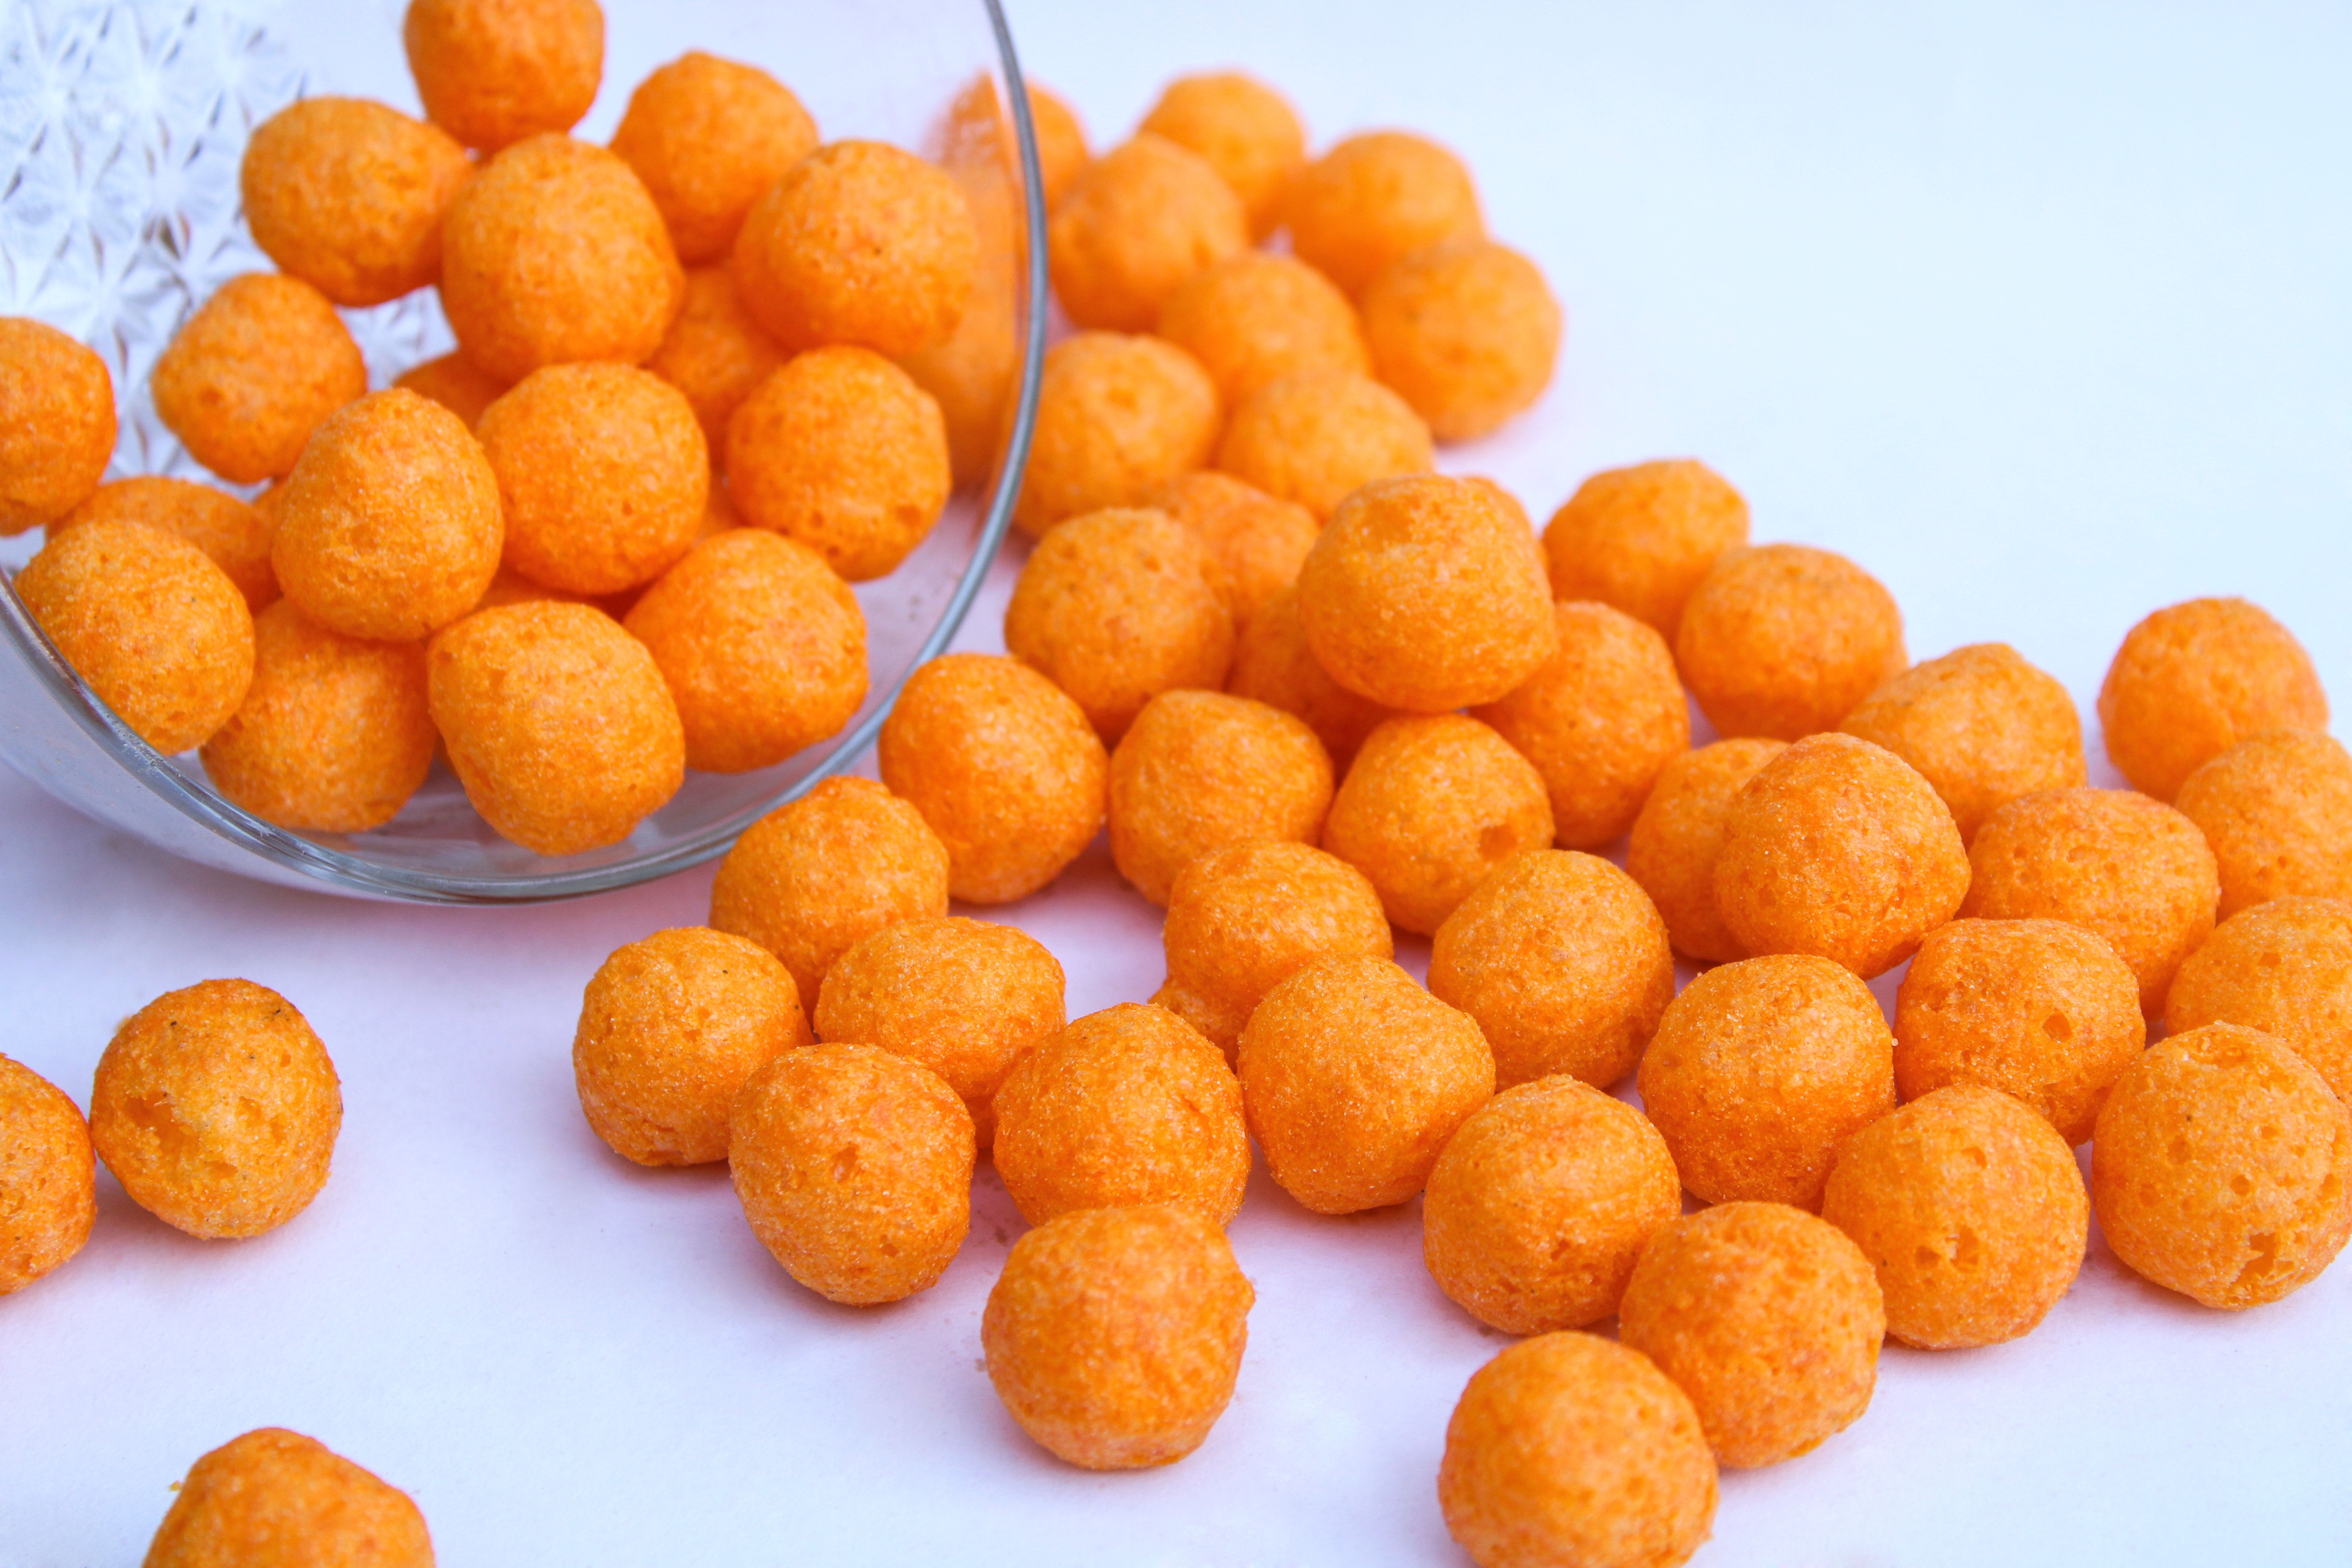 Cheese ball stock photo. Image of background, appetizer - 137472188